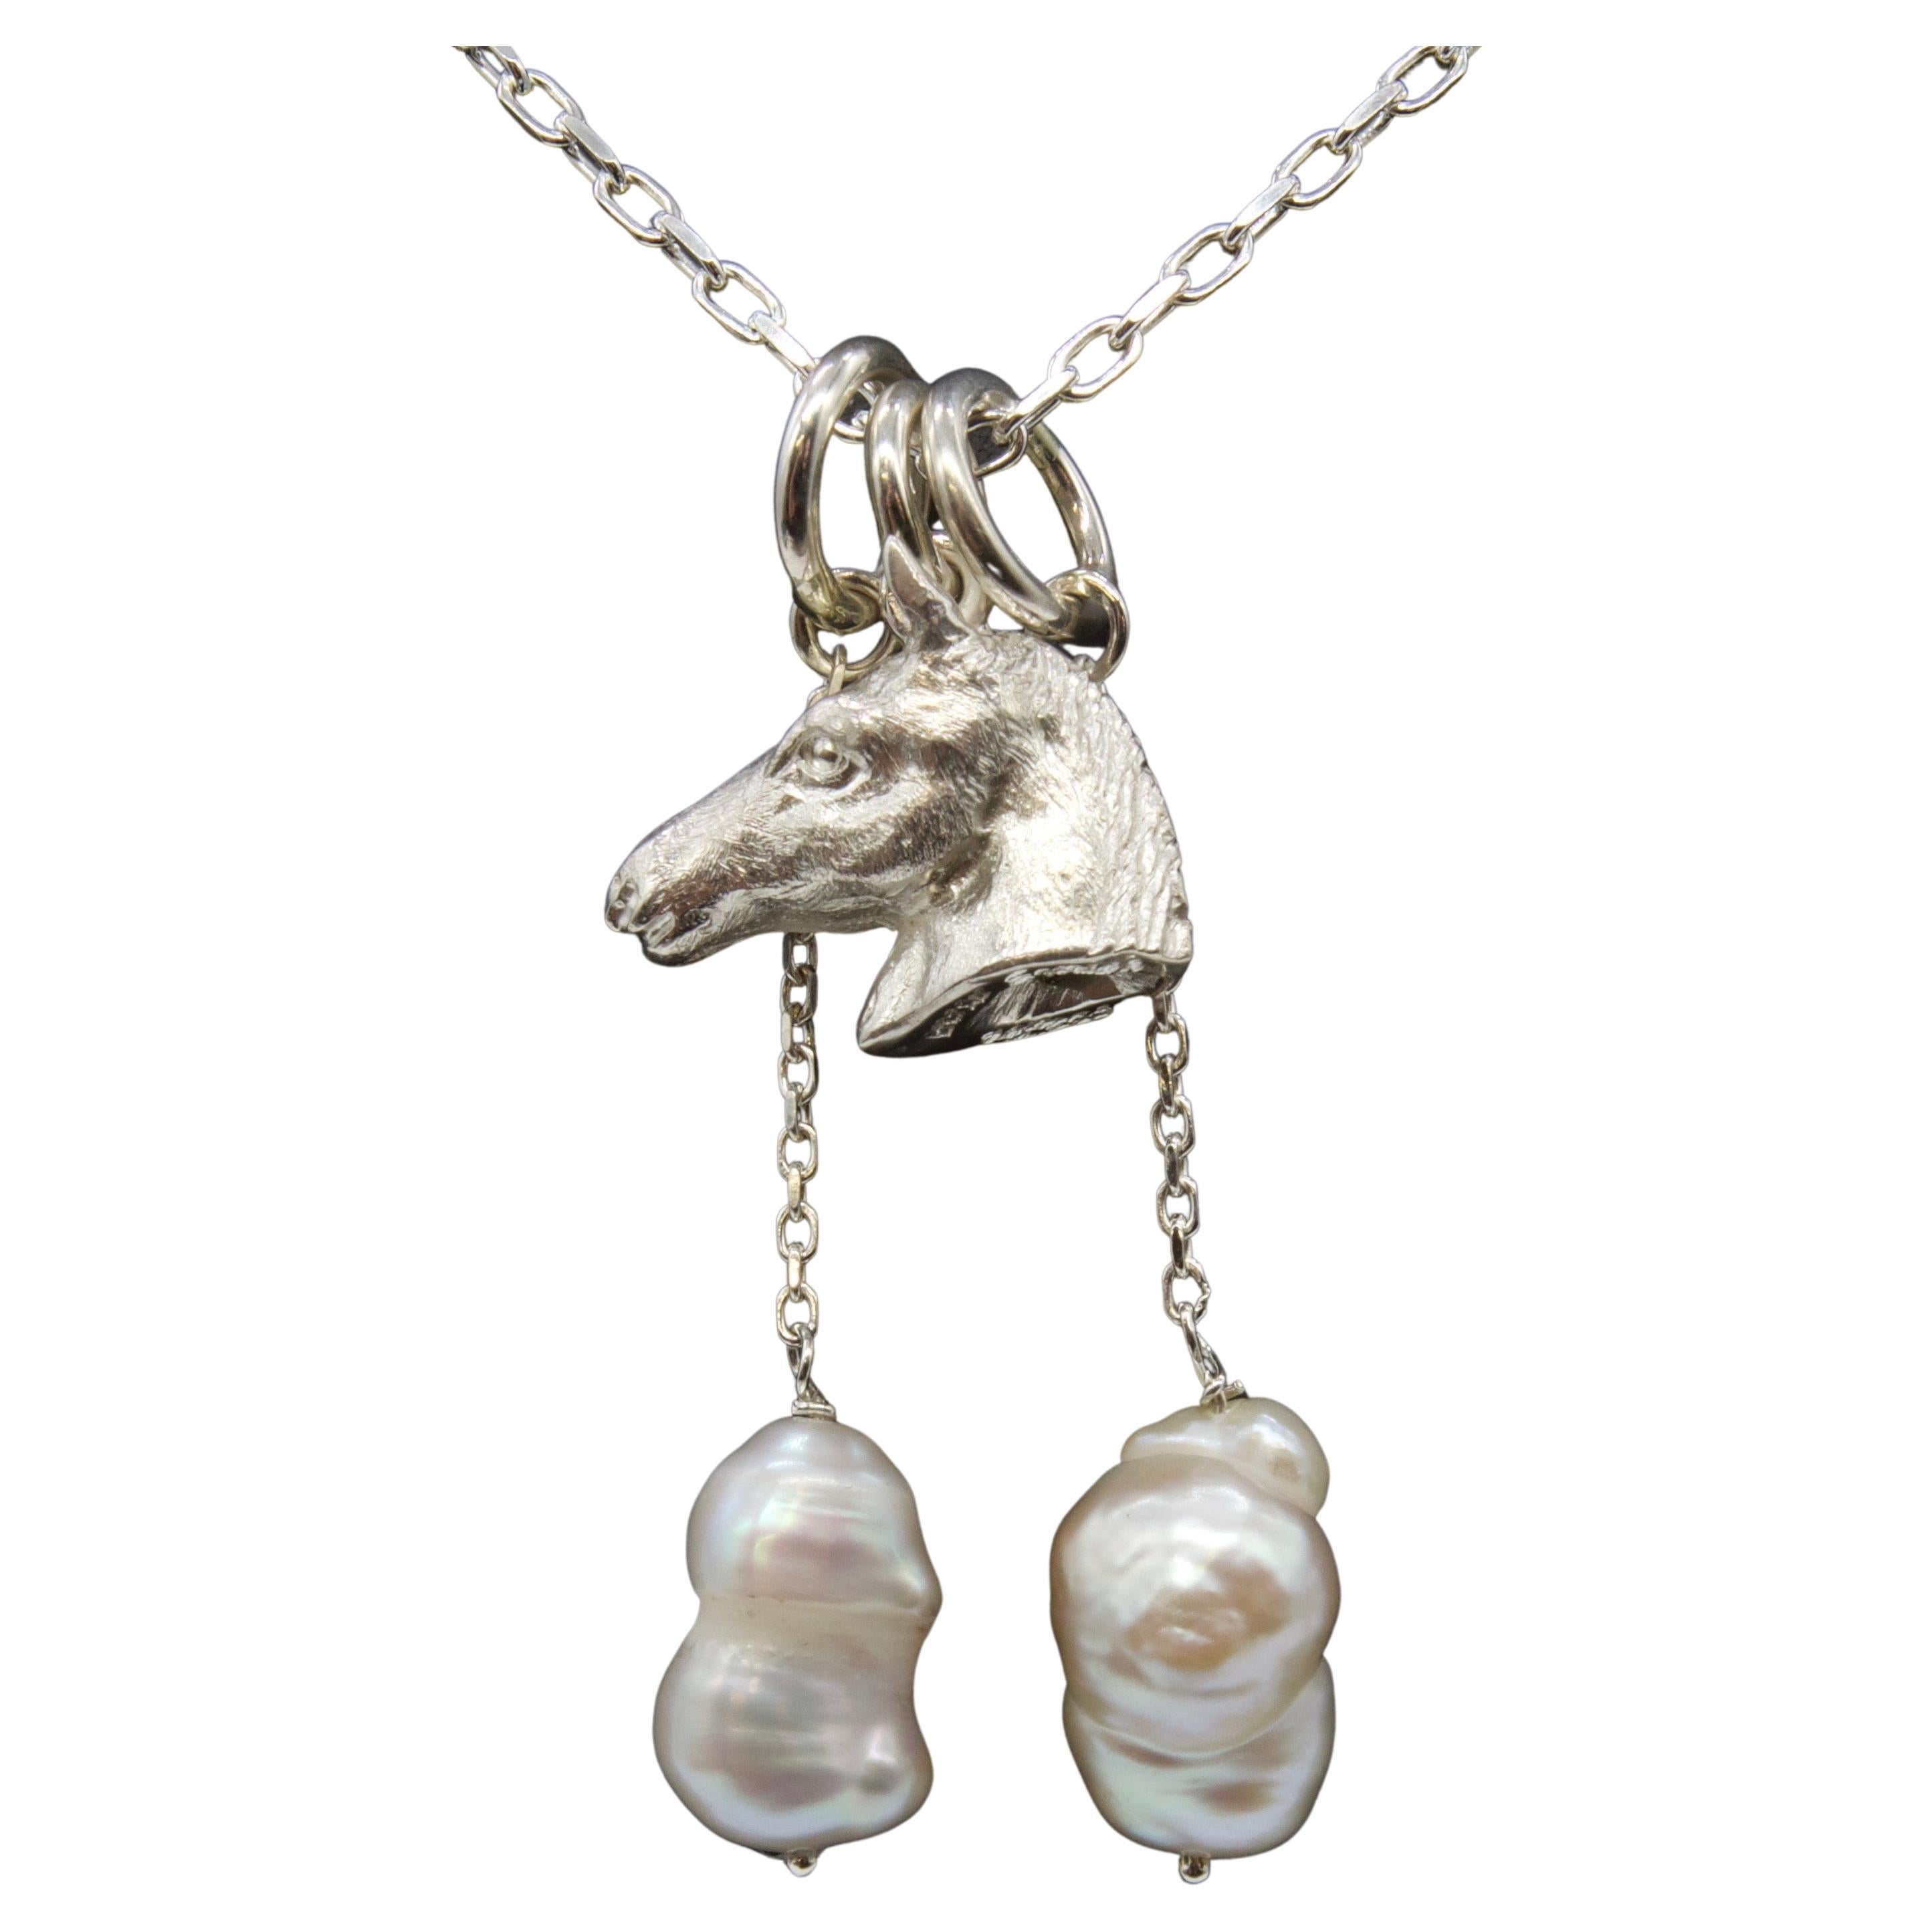 Paul Eaton Sculpted Horse Head Pendant with One or Two Pearl Drops For Sale